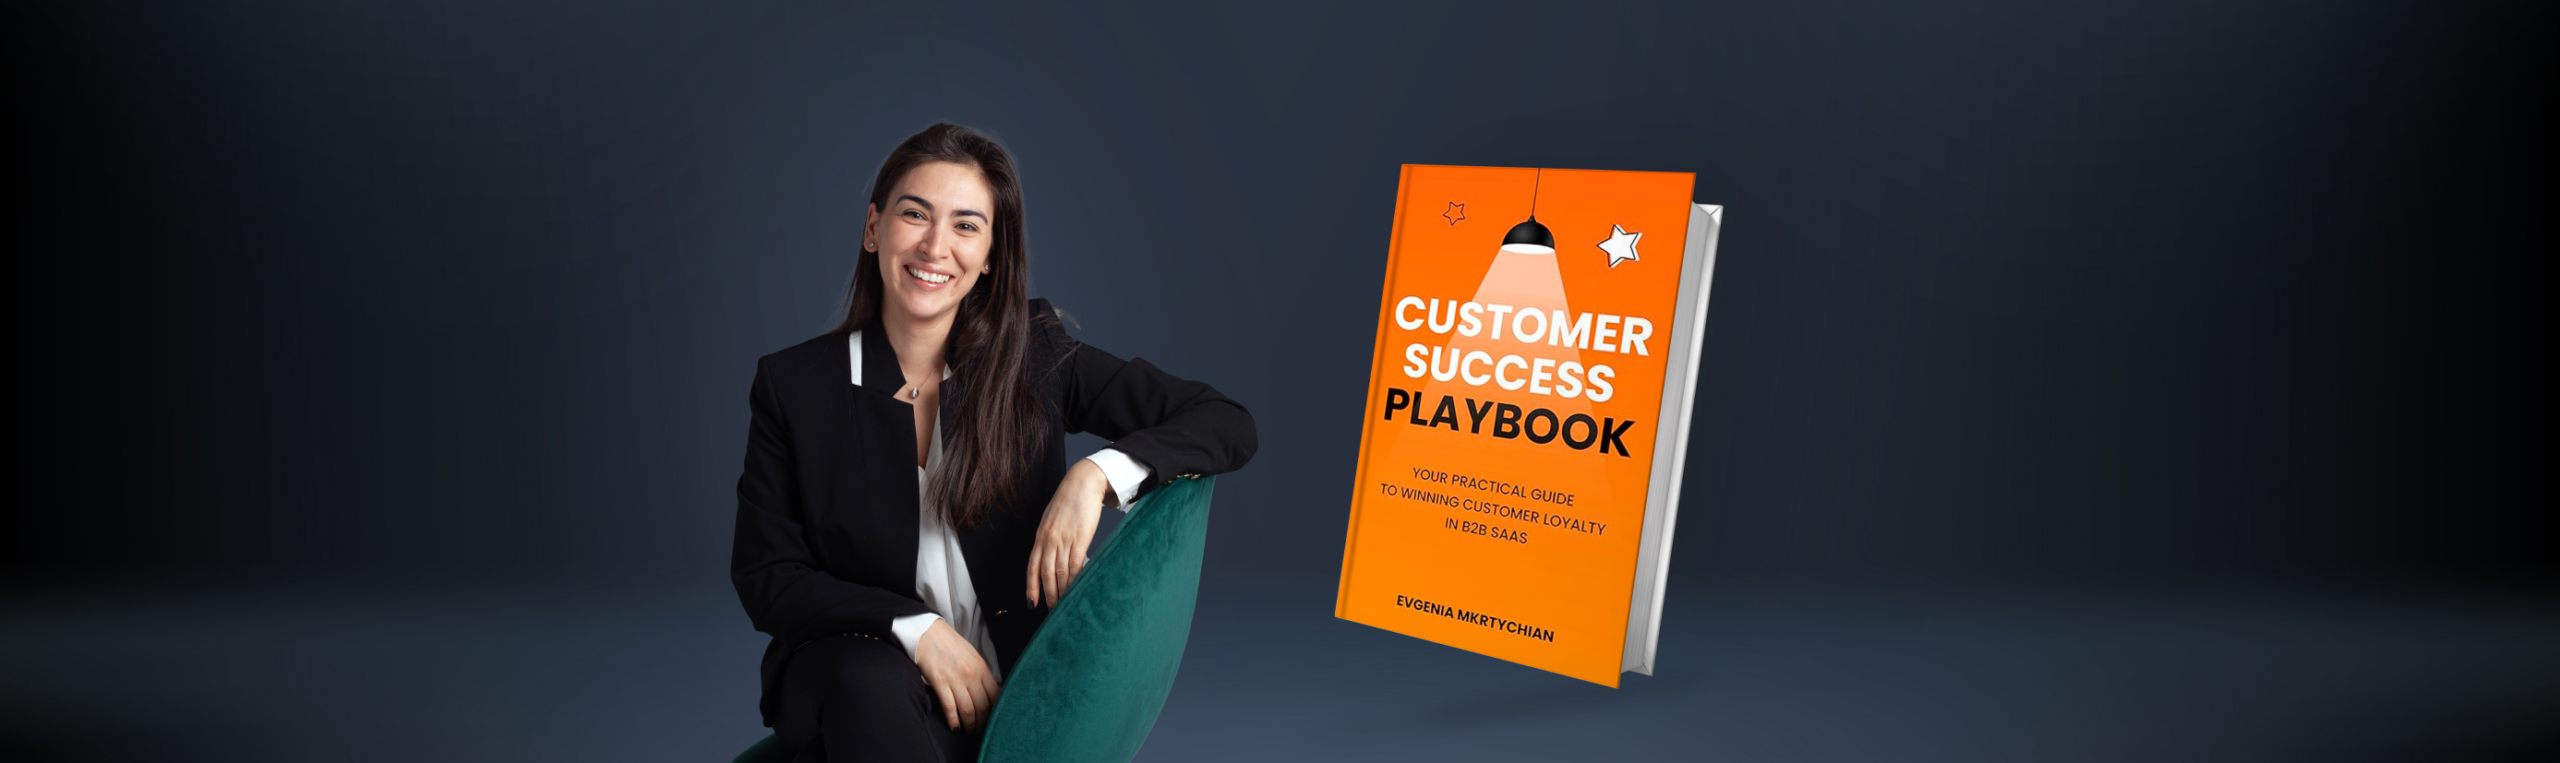 New Book Release: "Customer Success Playbook: Your Practical Guide to Winning Customer Loyalty in B2B SaaS"